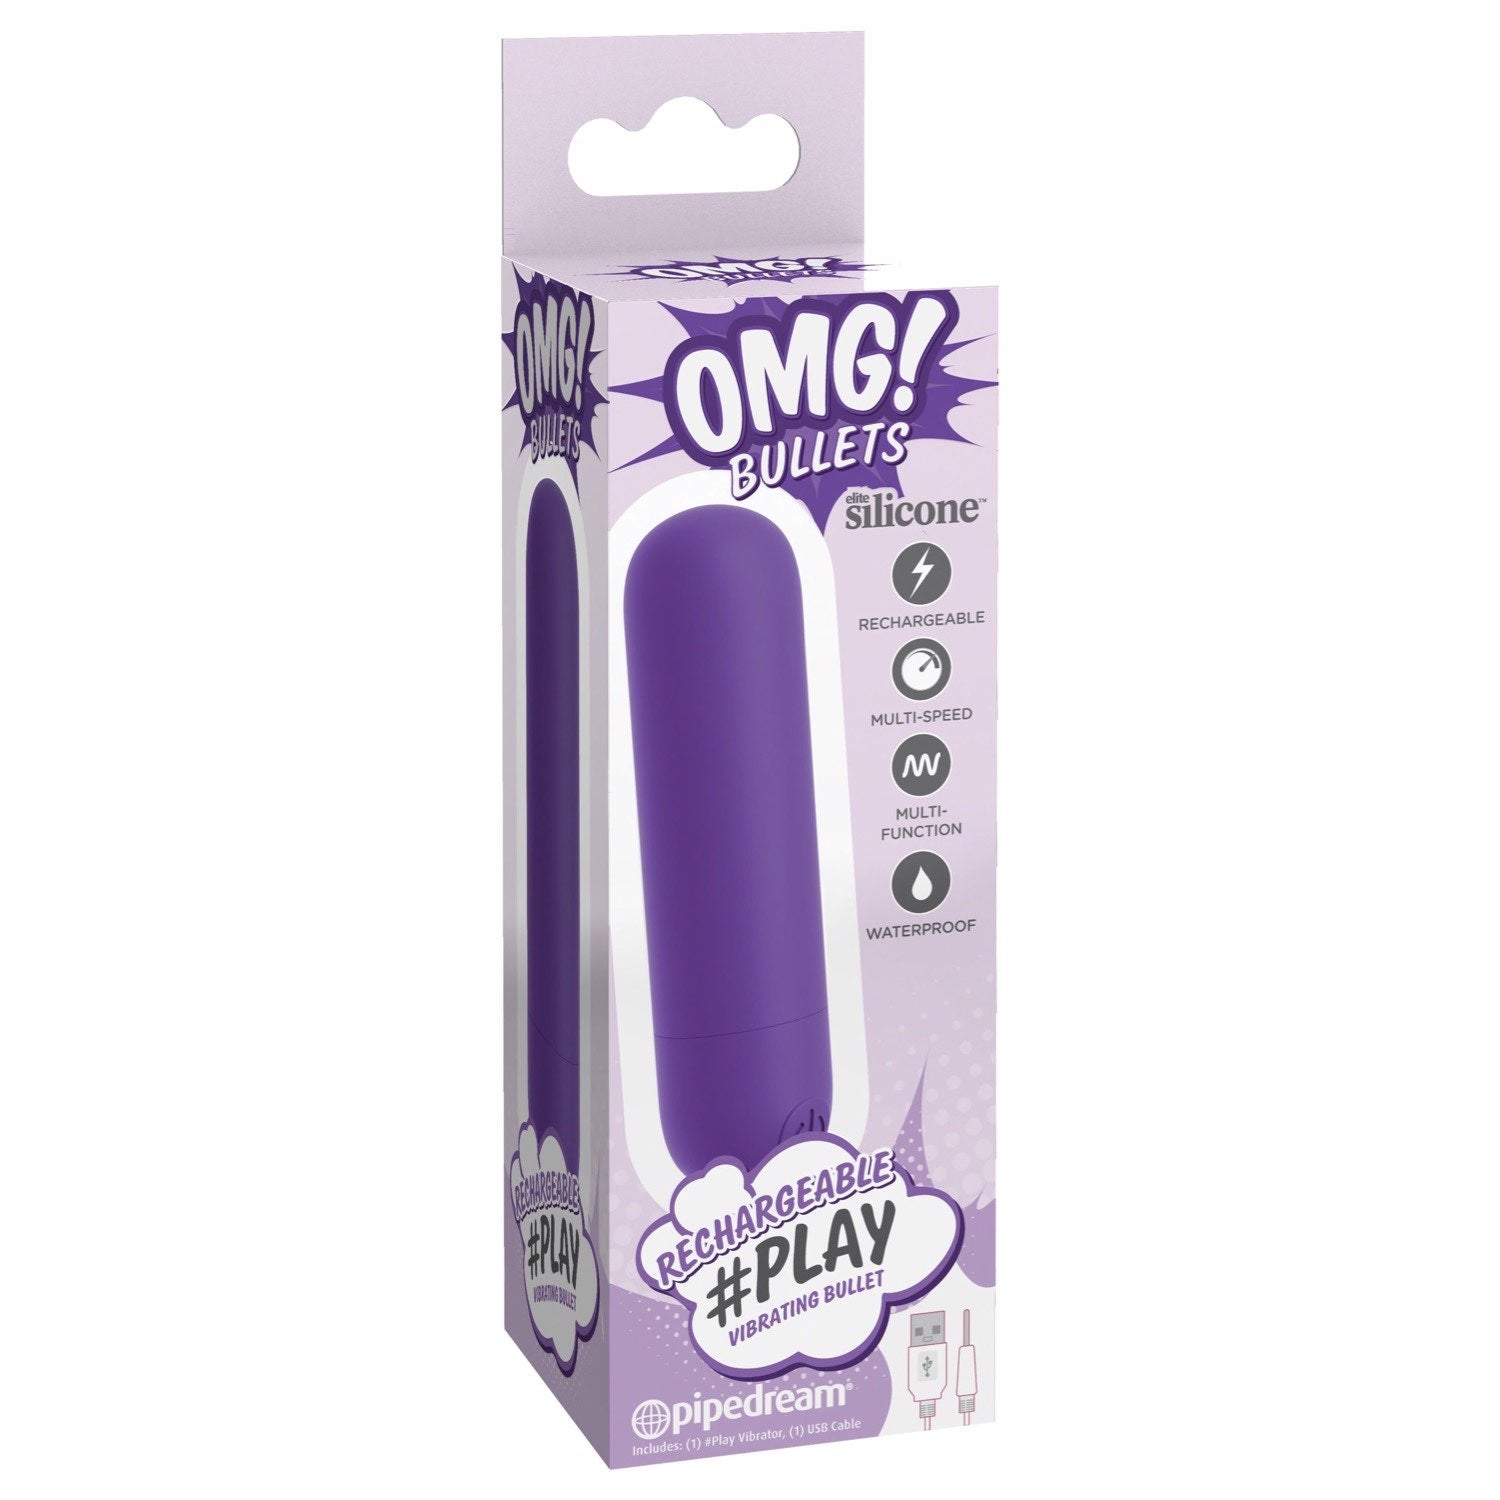 Omg! OMG! Bullets #Play - Purple USB Rechargeable Bullet by Pipedream